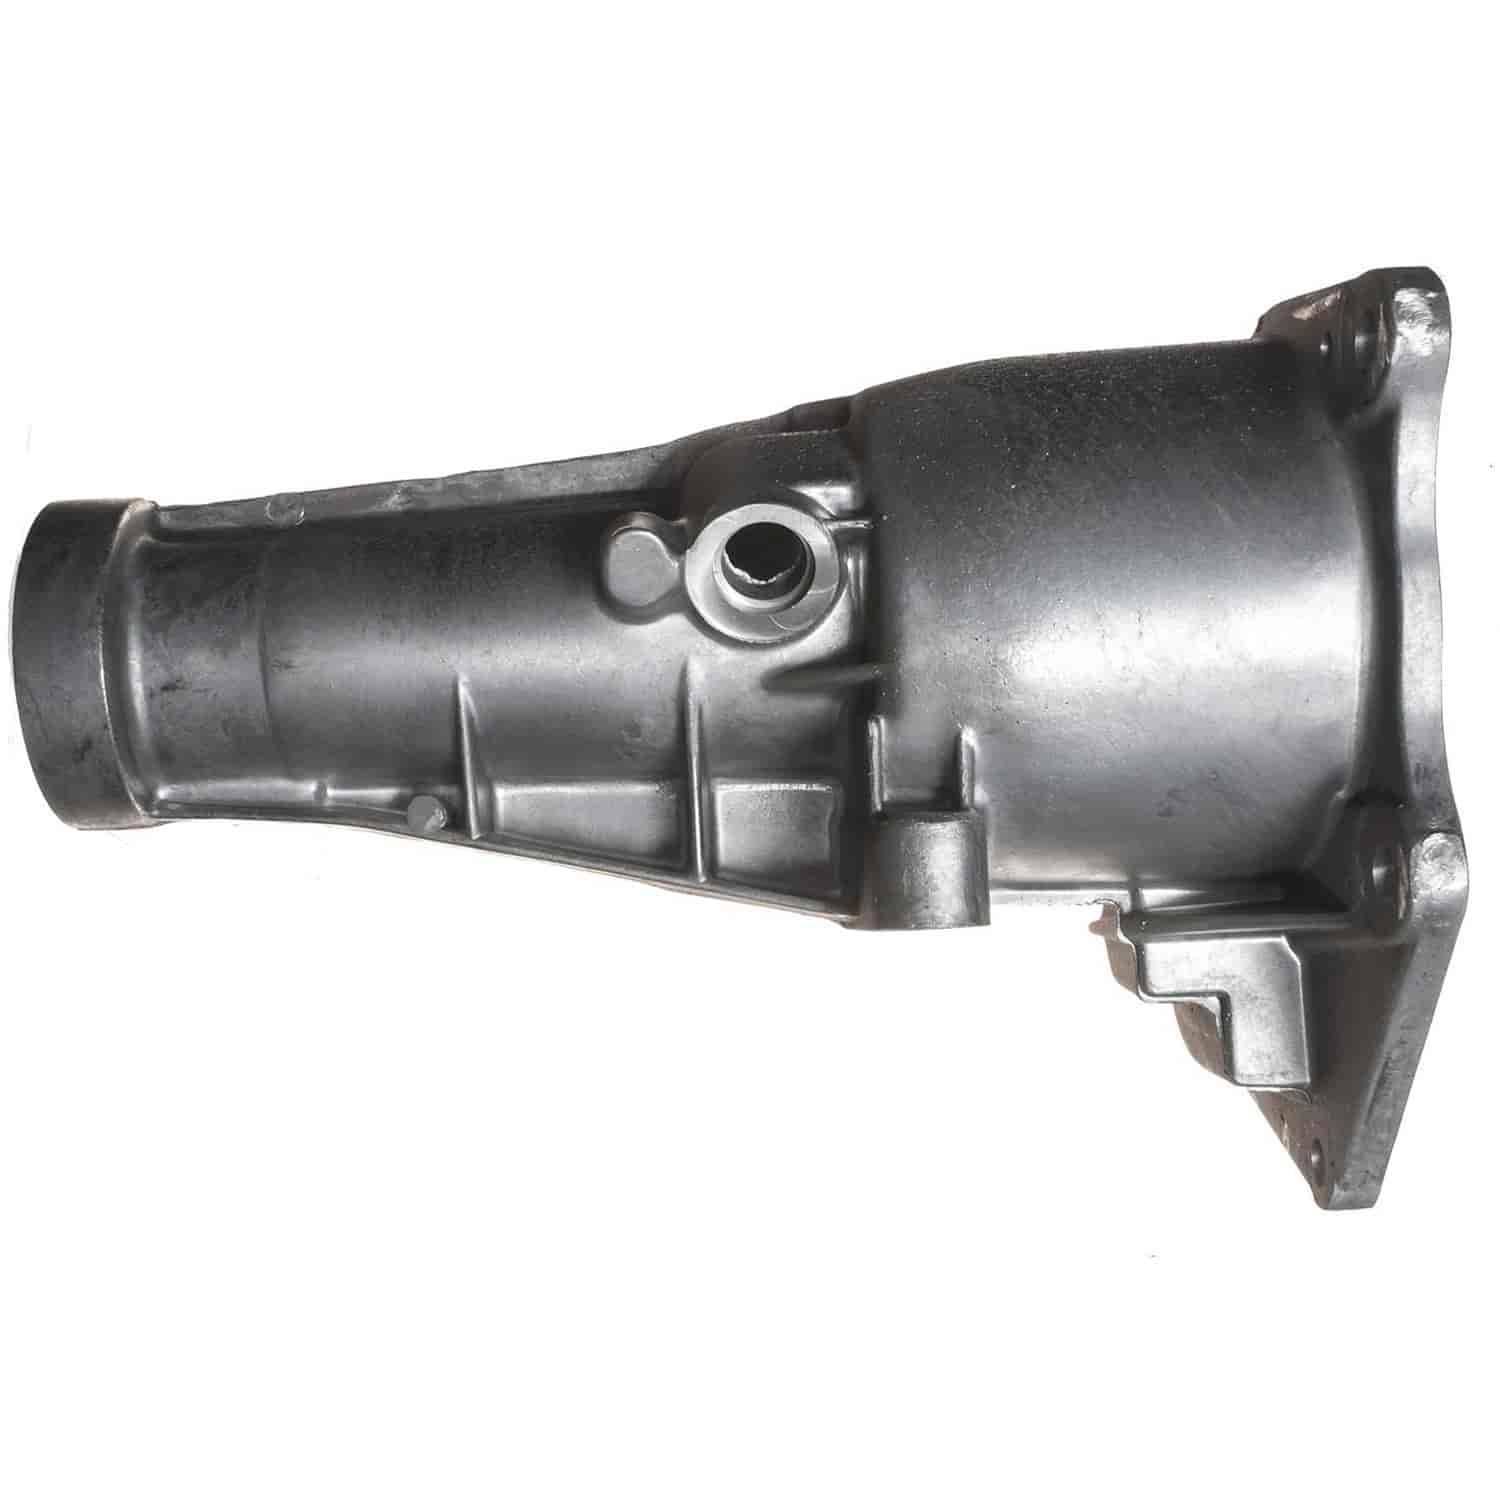 Replacement Extension Housing Assembly Transmission Tailhousing